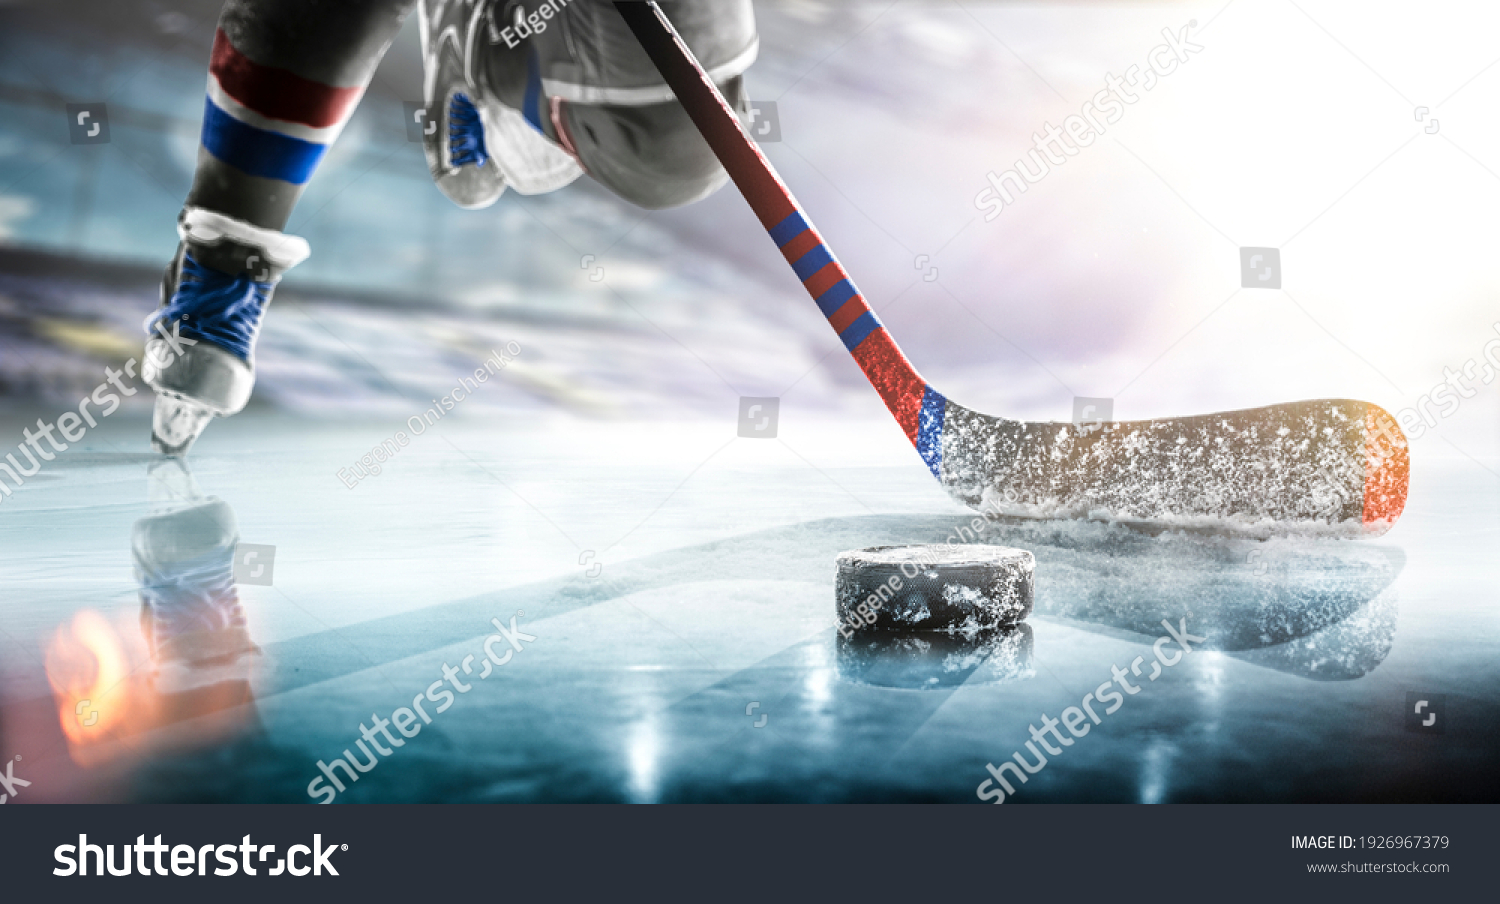 Close up of ice hockey stick on ice rink in position to hit hockey puck. #1926967379